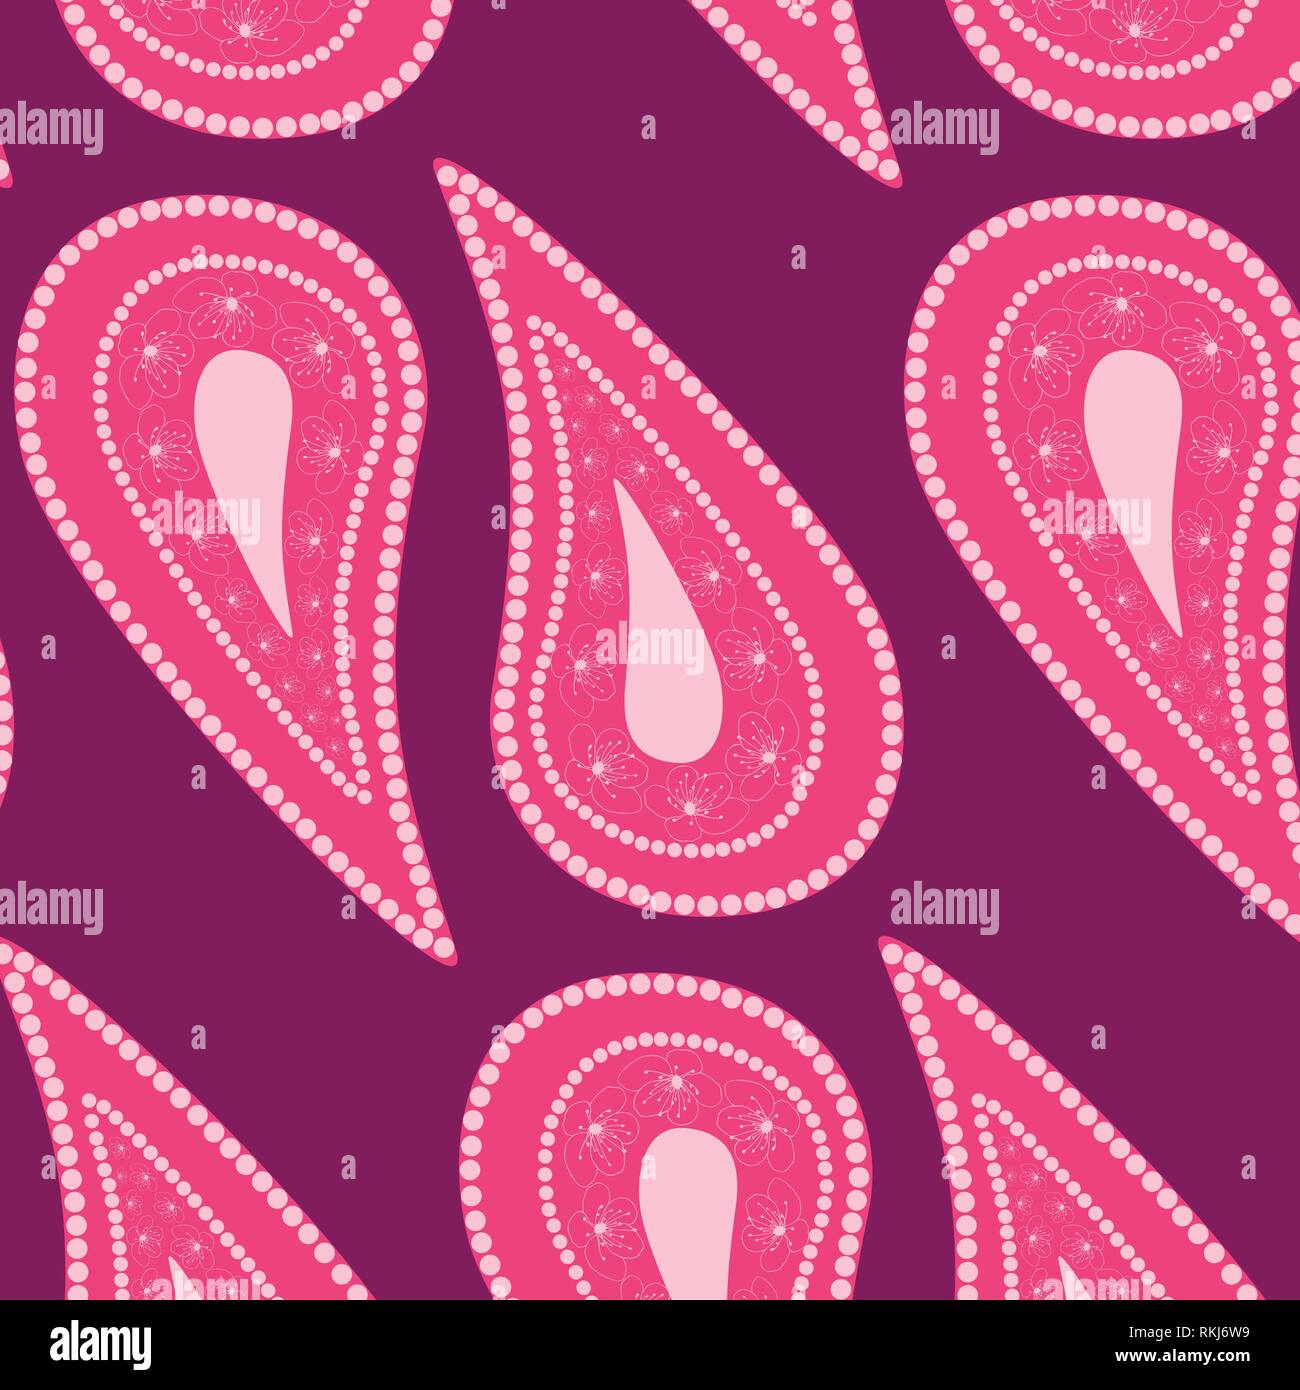 Ornamental vector pattern illustration with floral elements in pink and violet colors palette Stock Vector